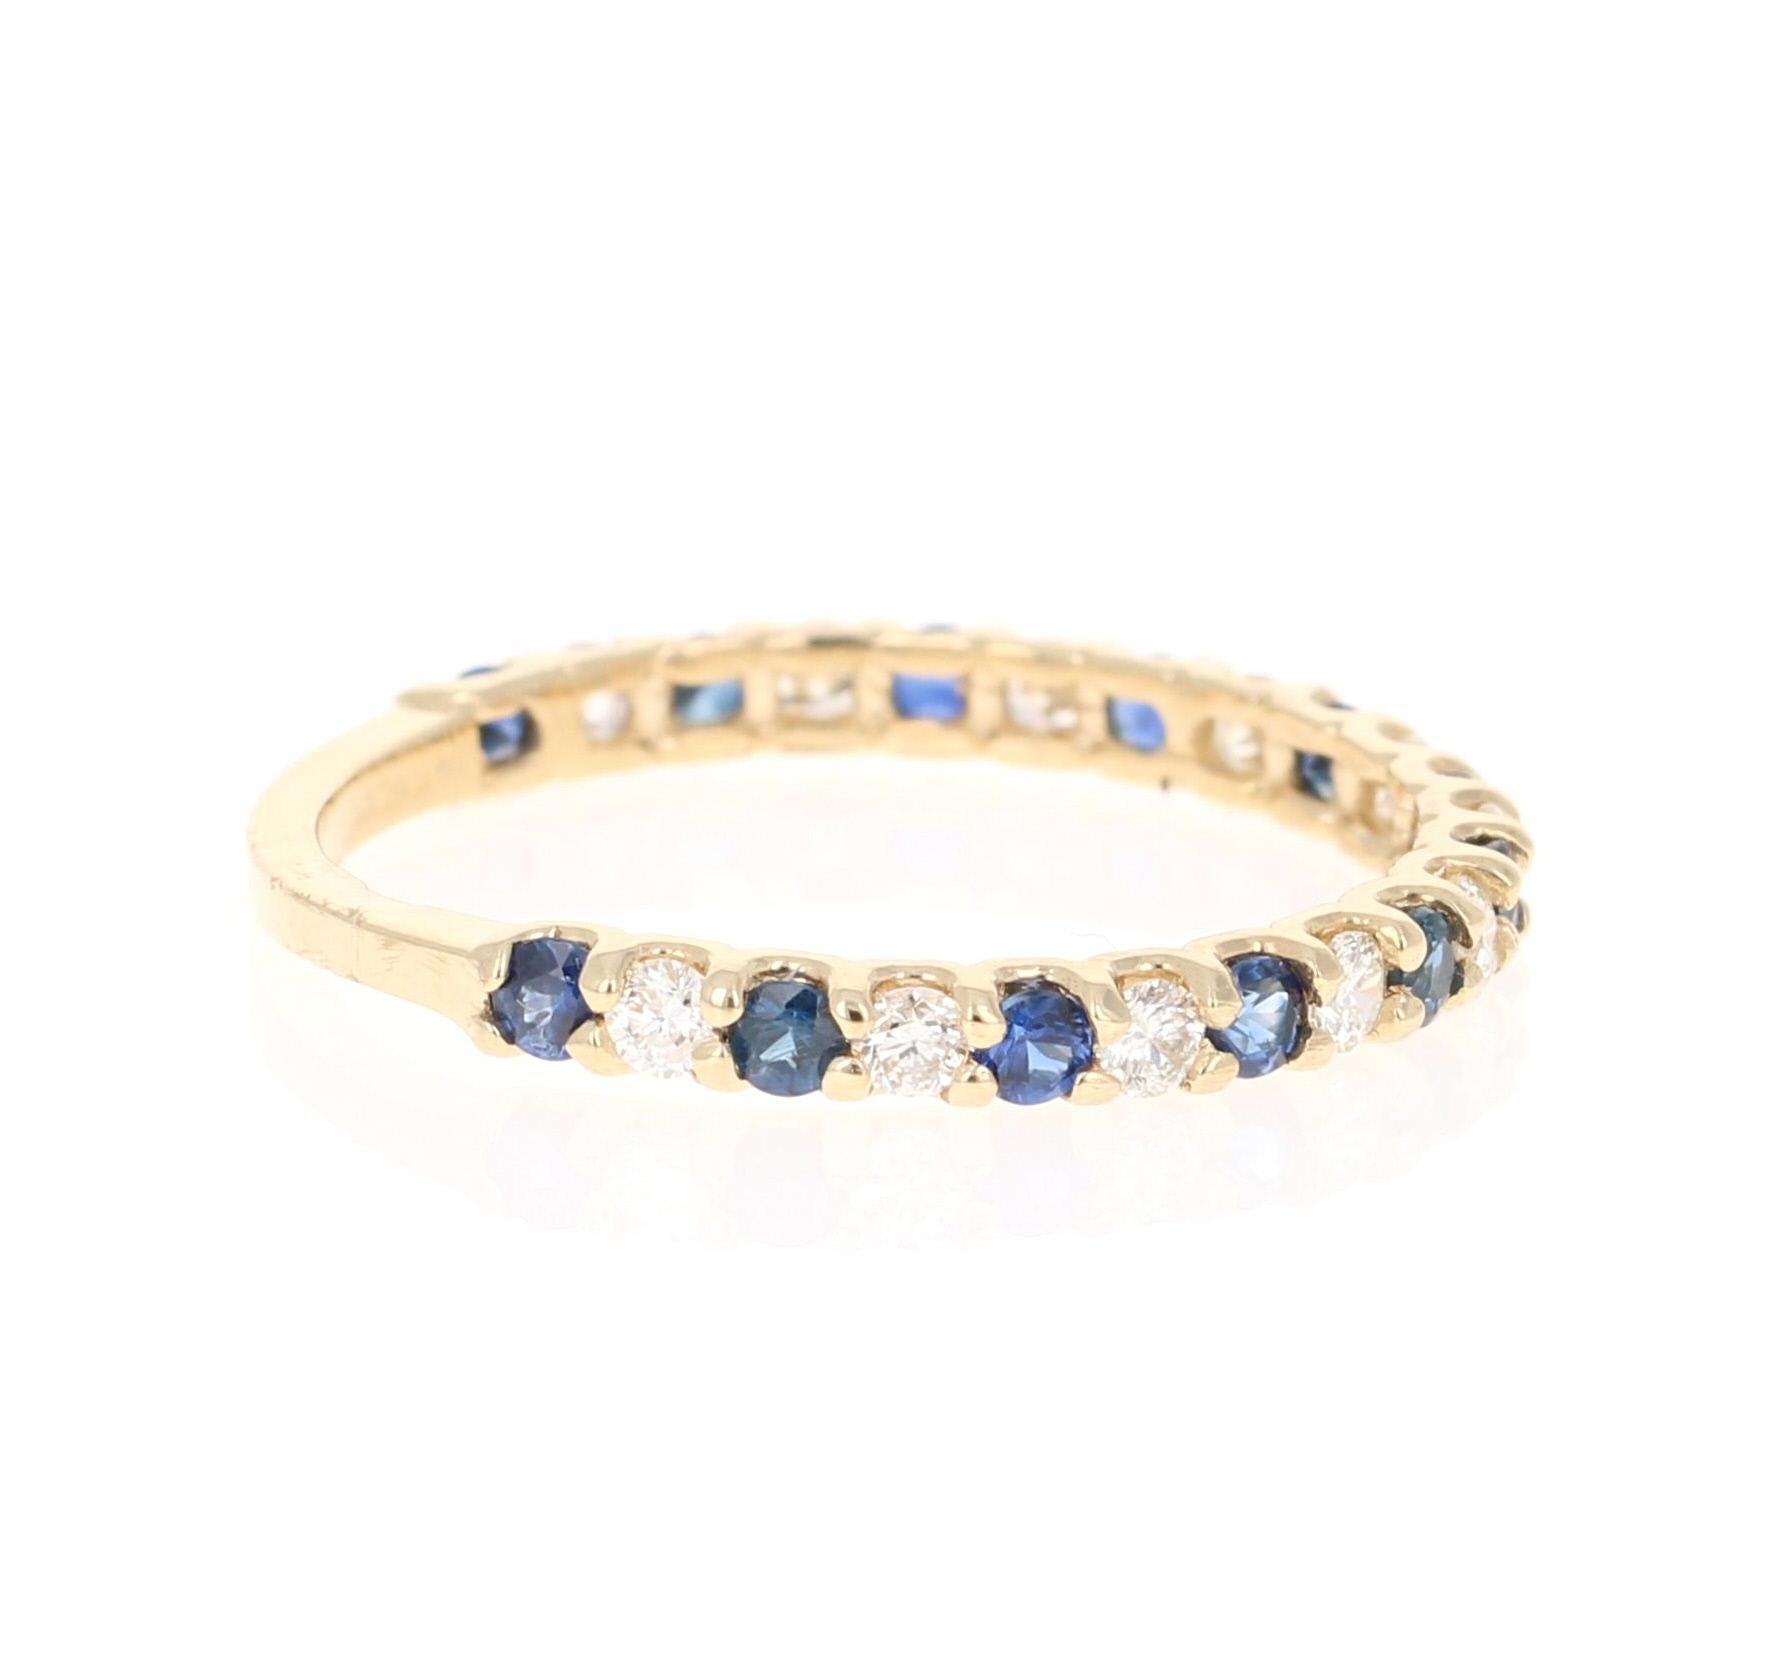 Cute and dainty Sapphire and Diamond band that is sure to be a great addition to anyone's collection.   

There are 11 Round Cut Sapphires that weigh 0.48 carats and 12 Round Cut Diamonds that weigh 0.32 carats (Clarity: SI, Color: F).  The total